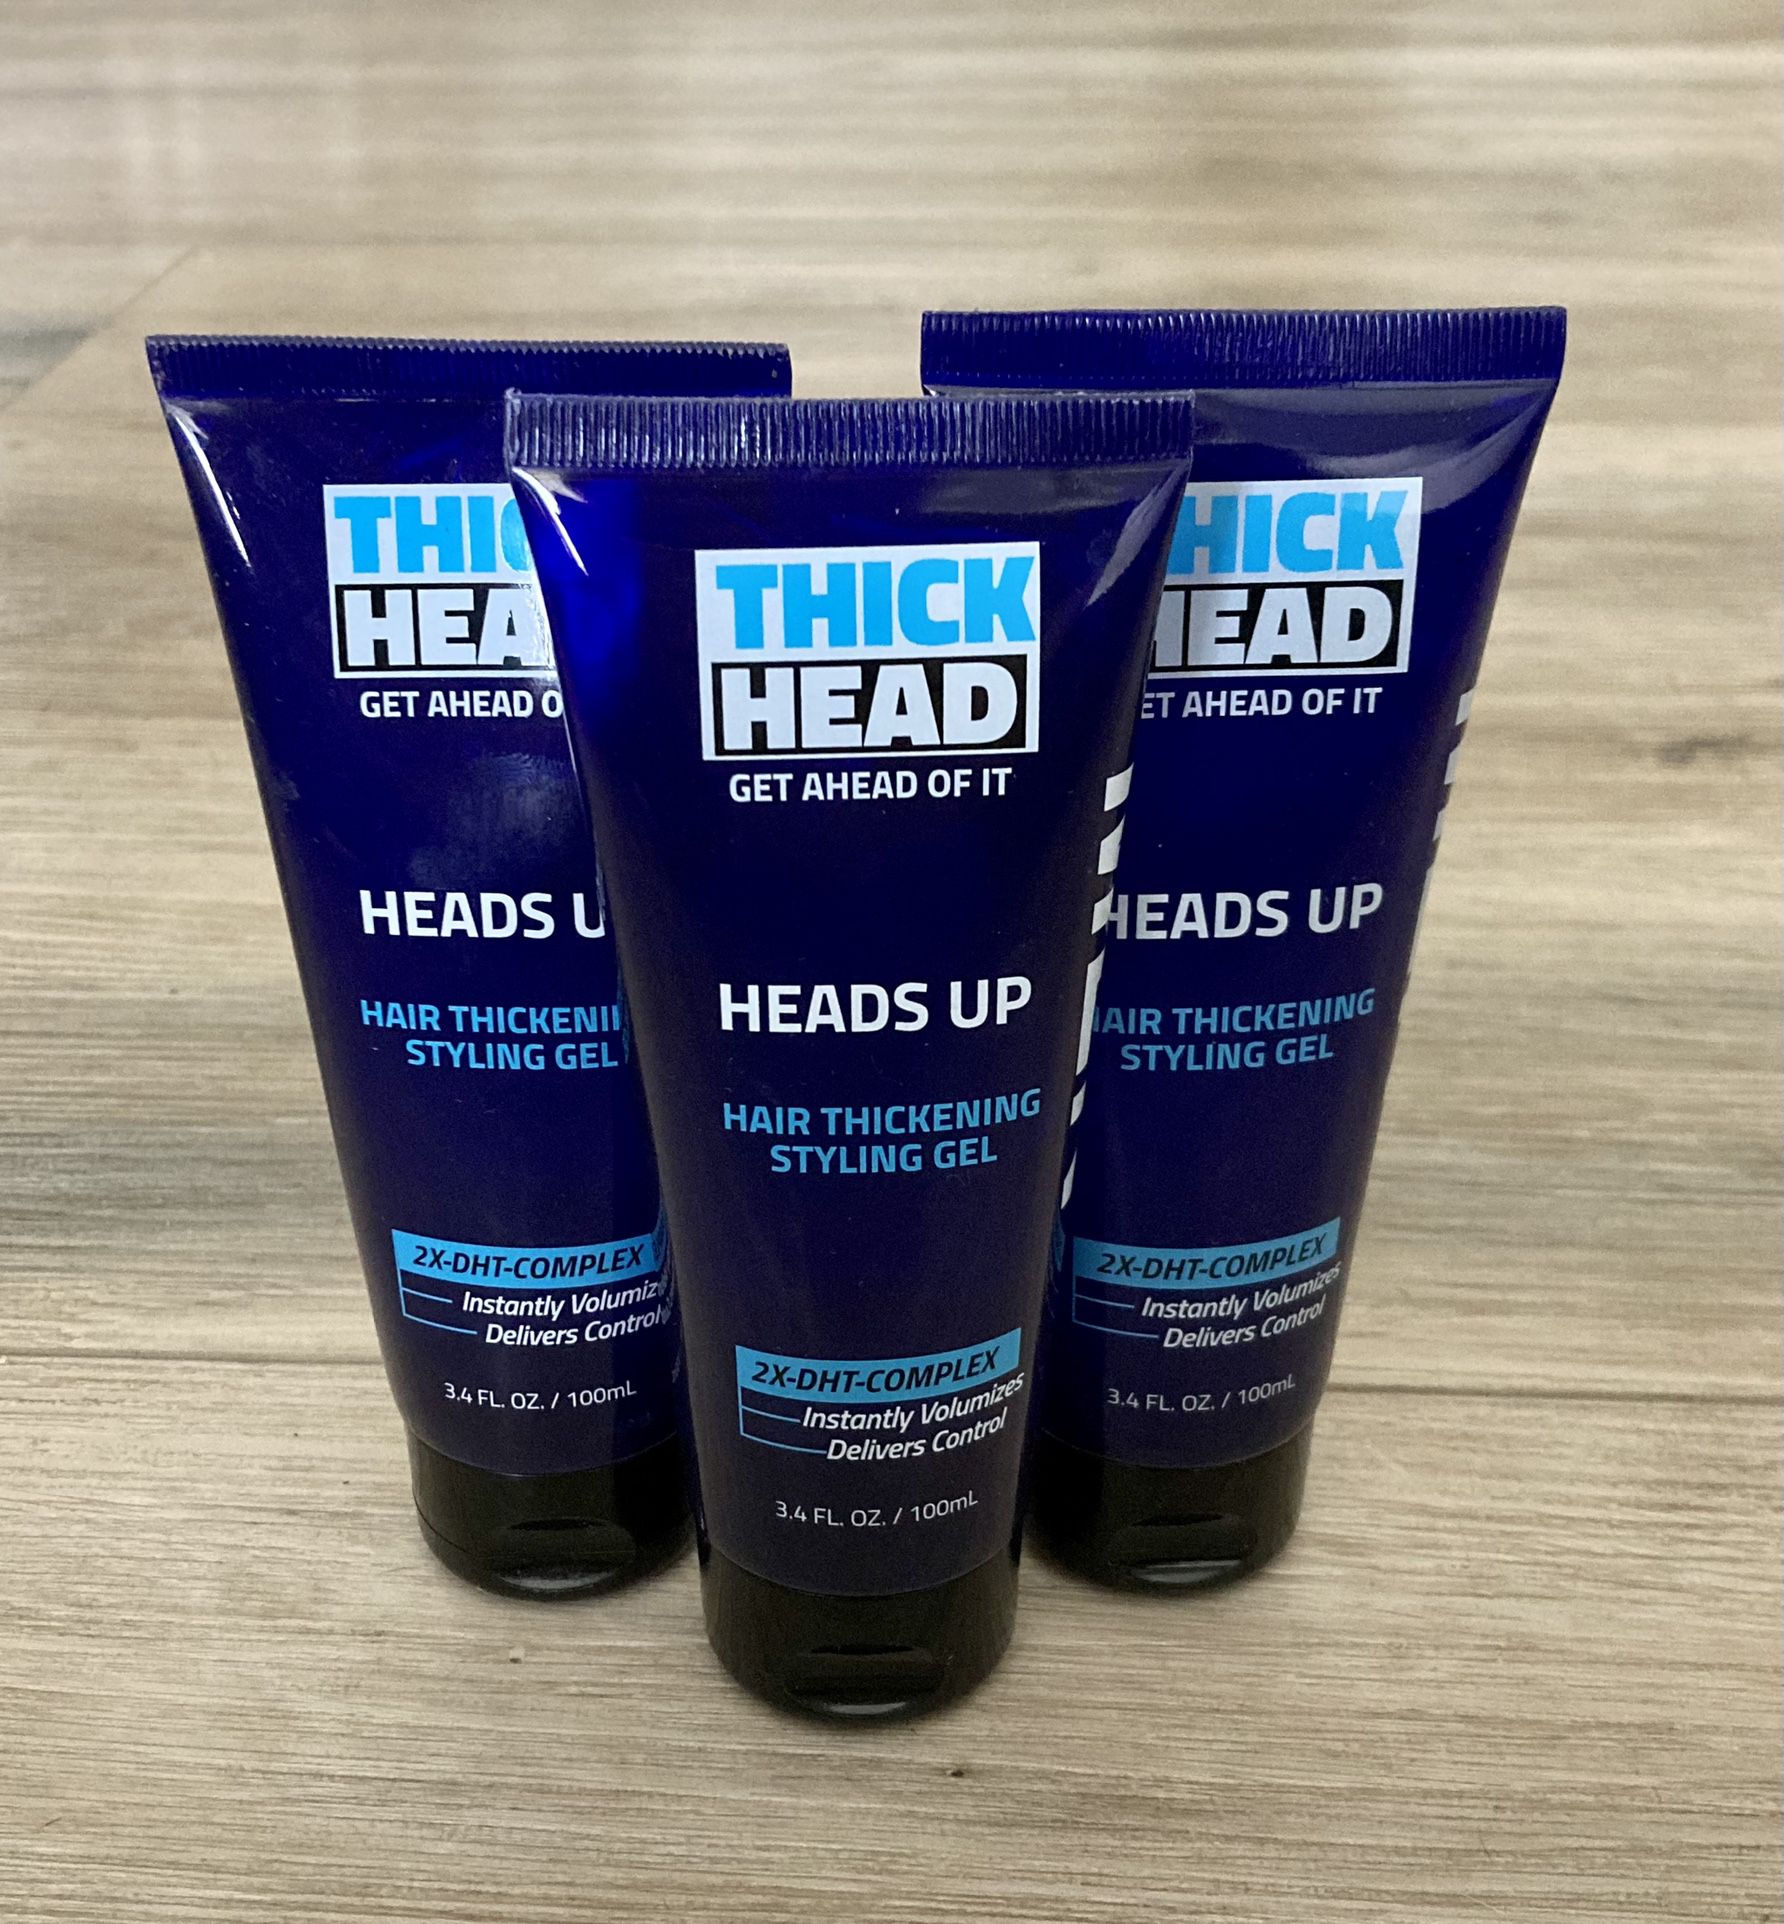 4 New Bottles Of Thick Head Thickening Hair Gel for Sale in Glendora, CA -  OfferUp